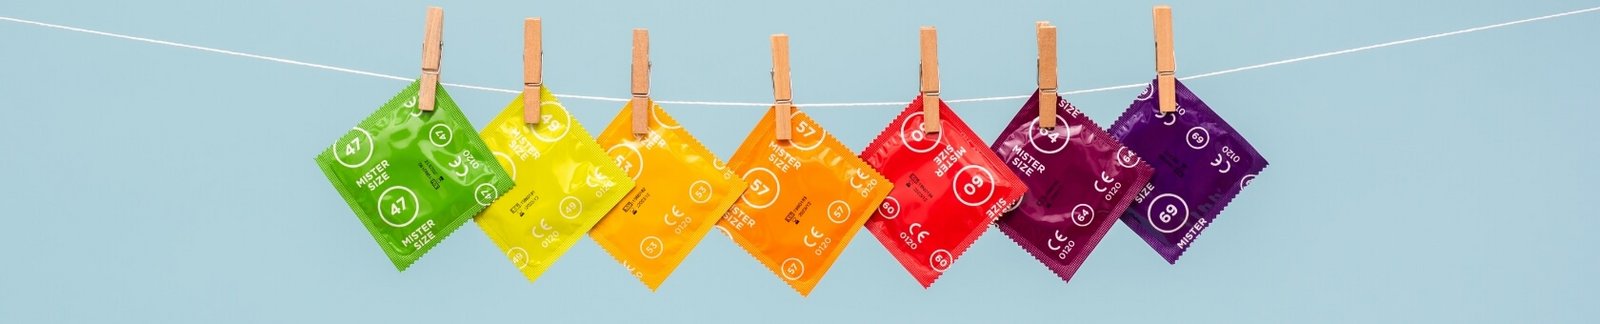 Mister Size condoms in different sizes on a line